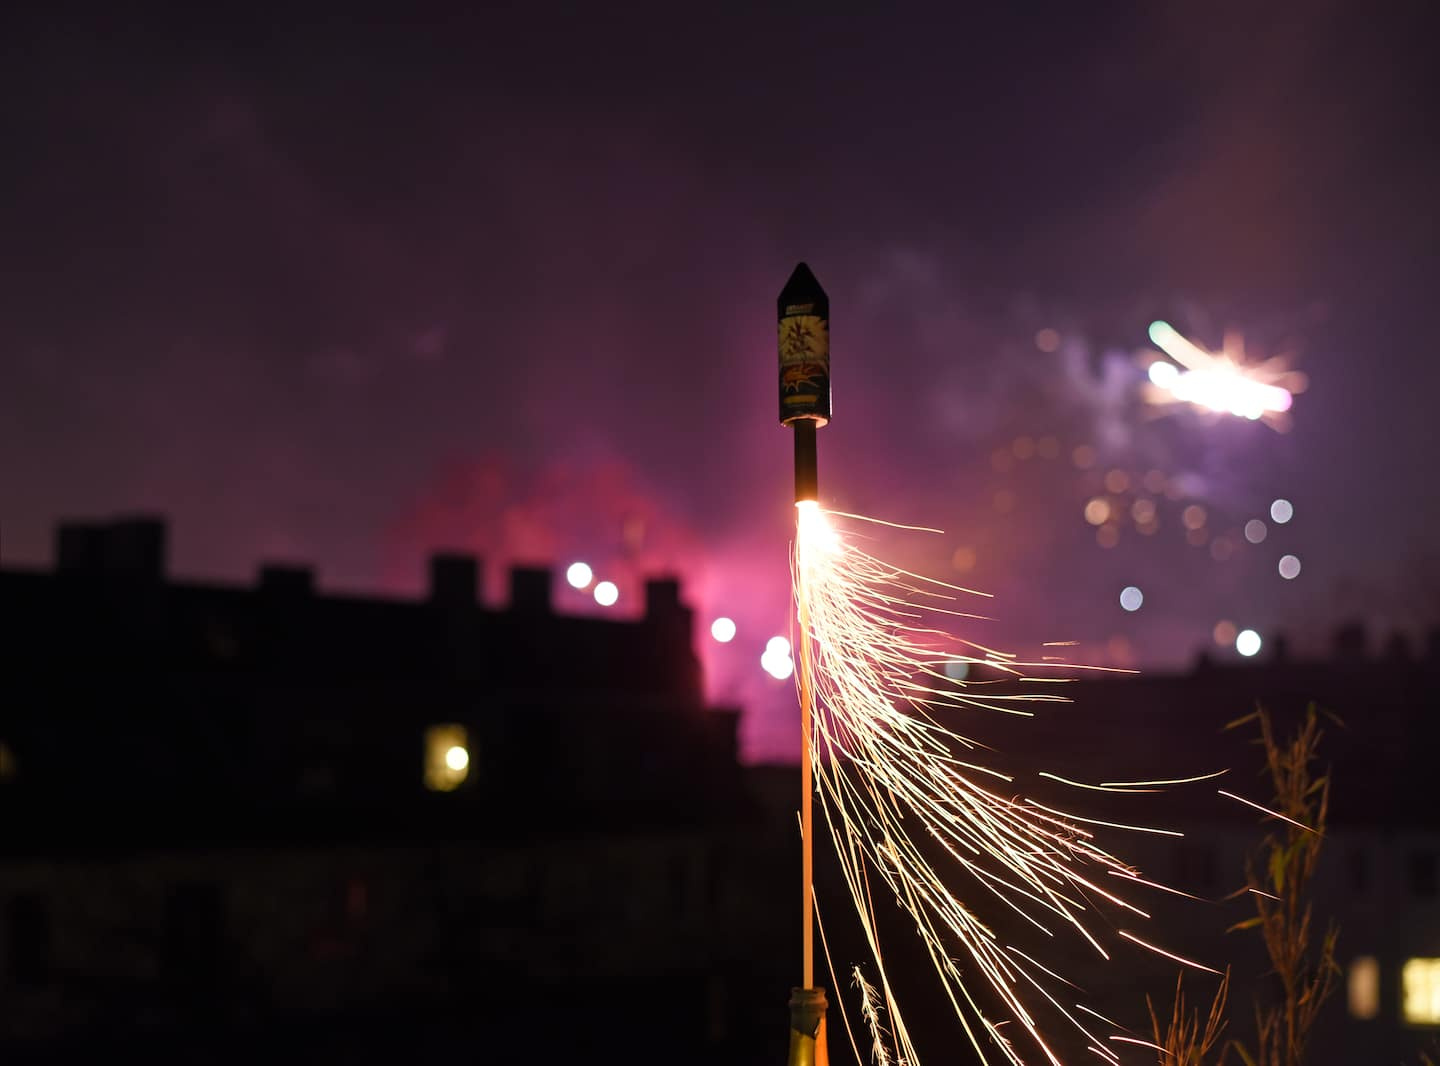 A teenager dies while handling a fireworks mortar